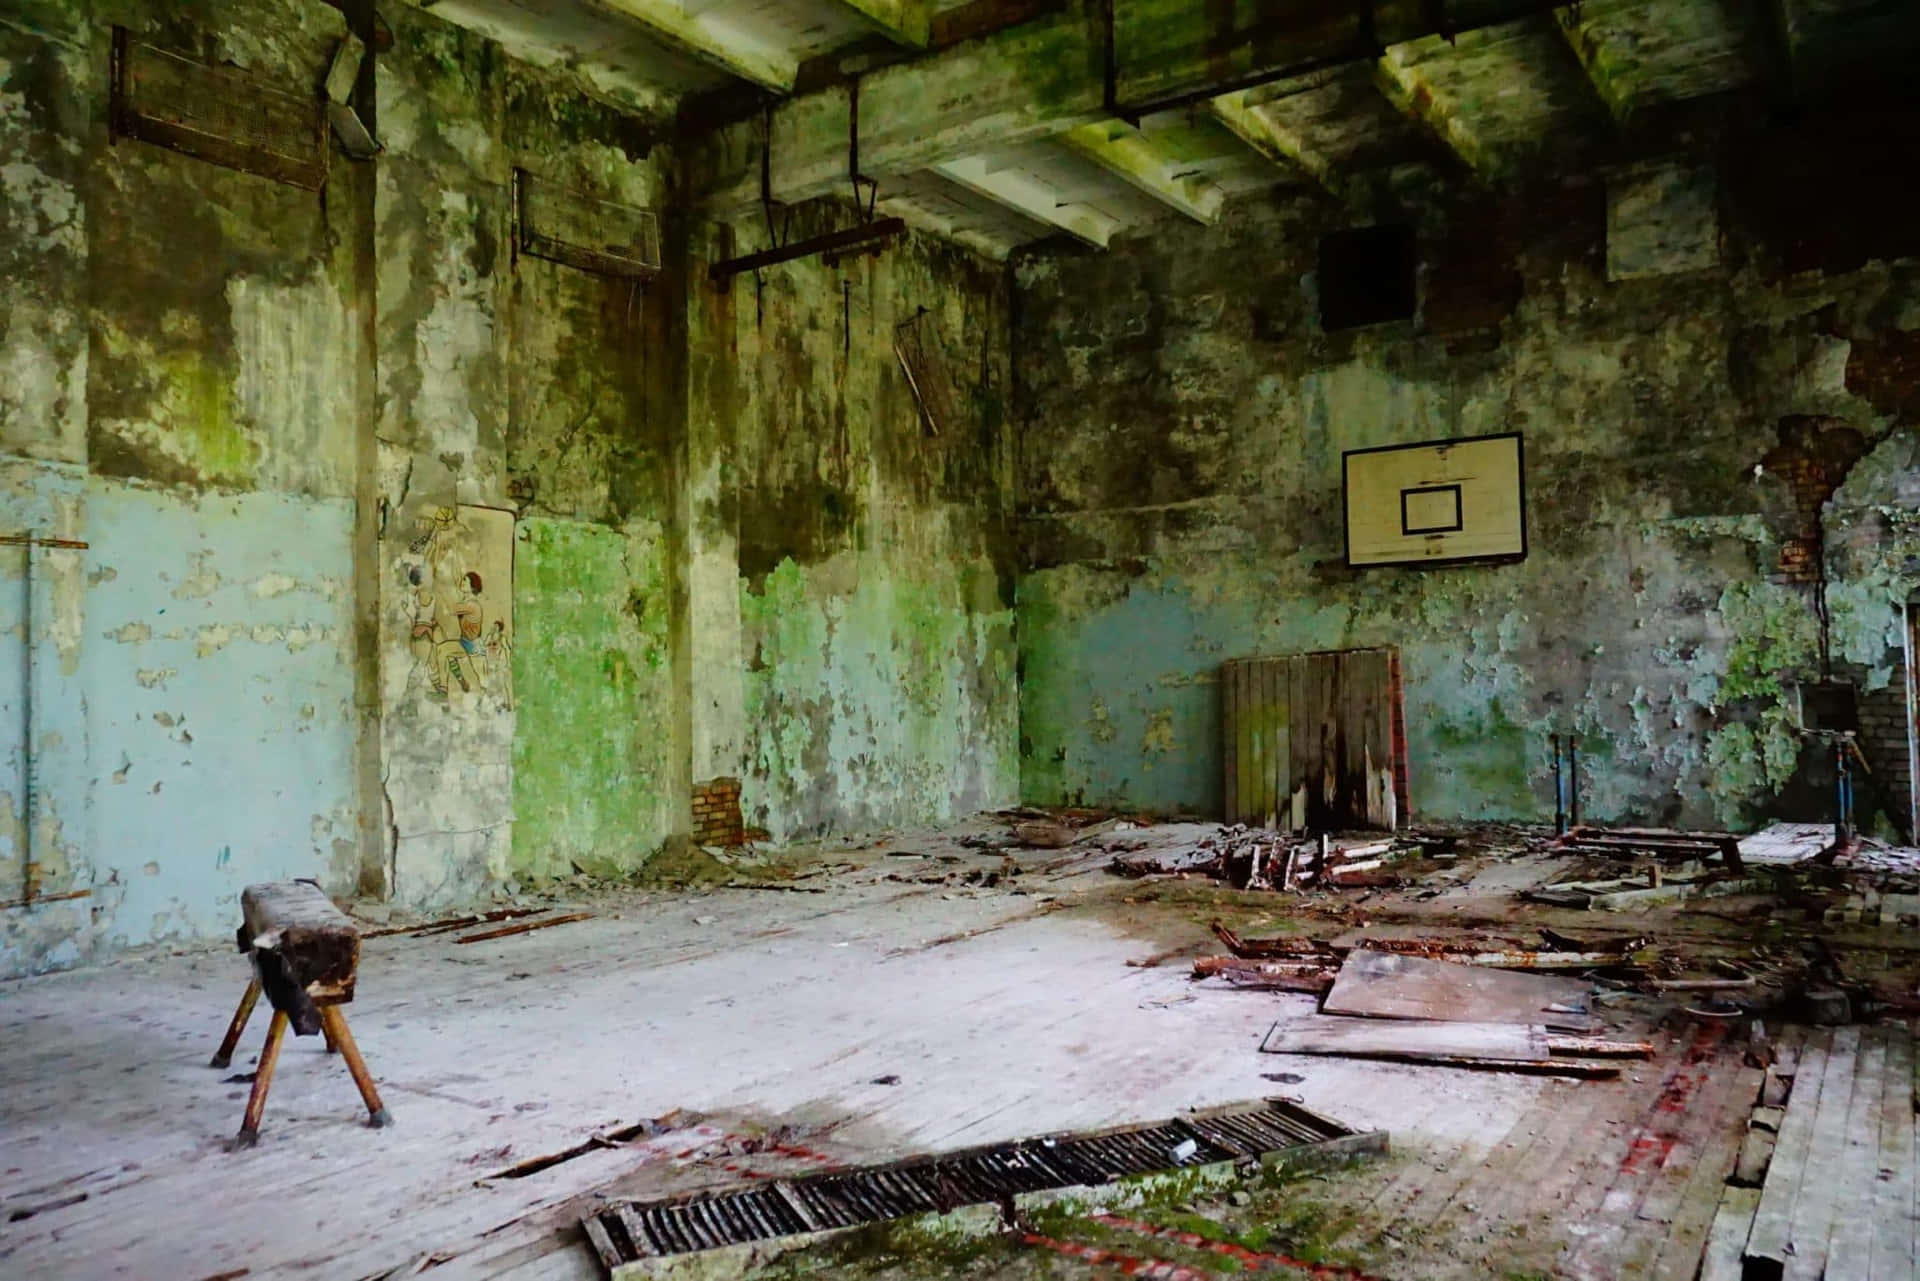 An Abandoned Basketball Court With A Wooden Floor